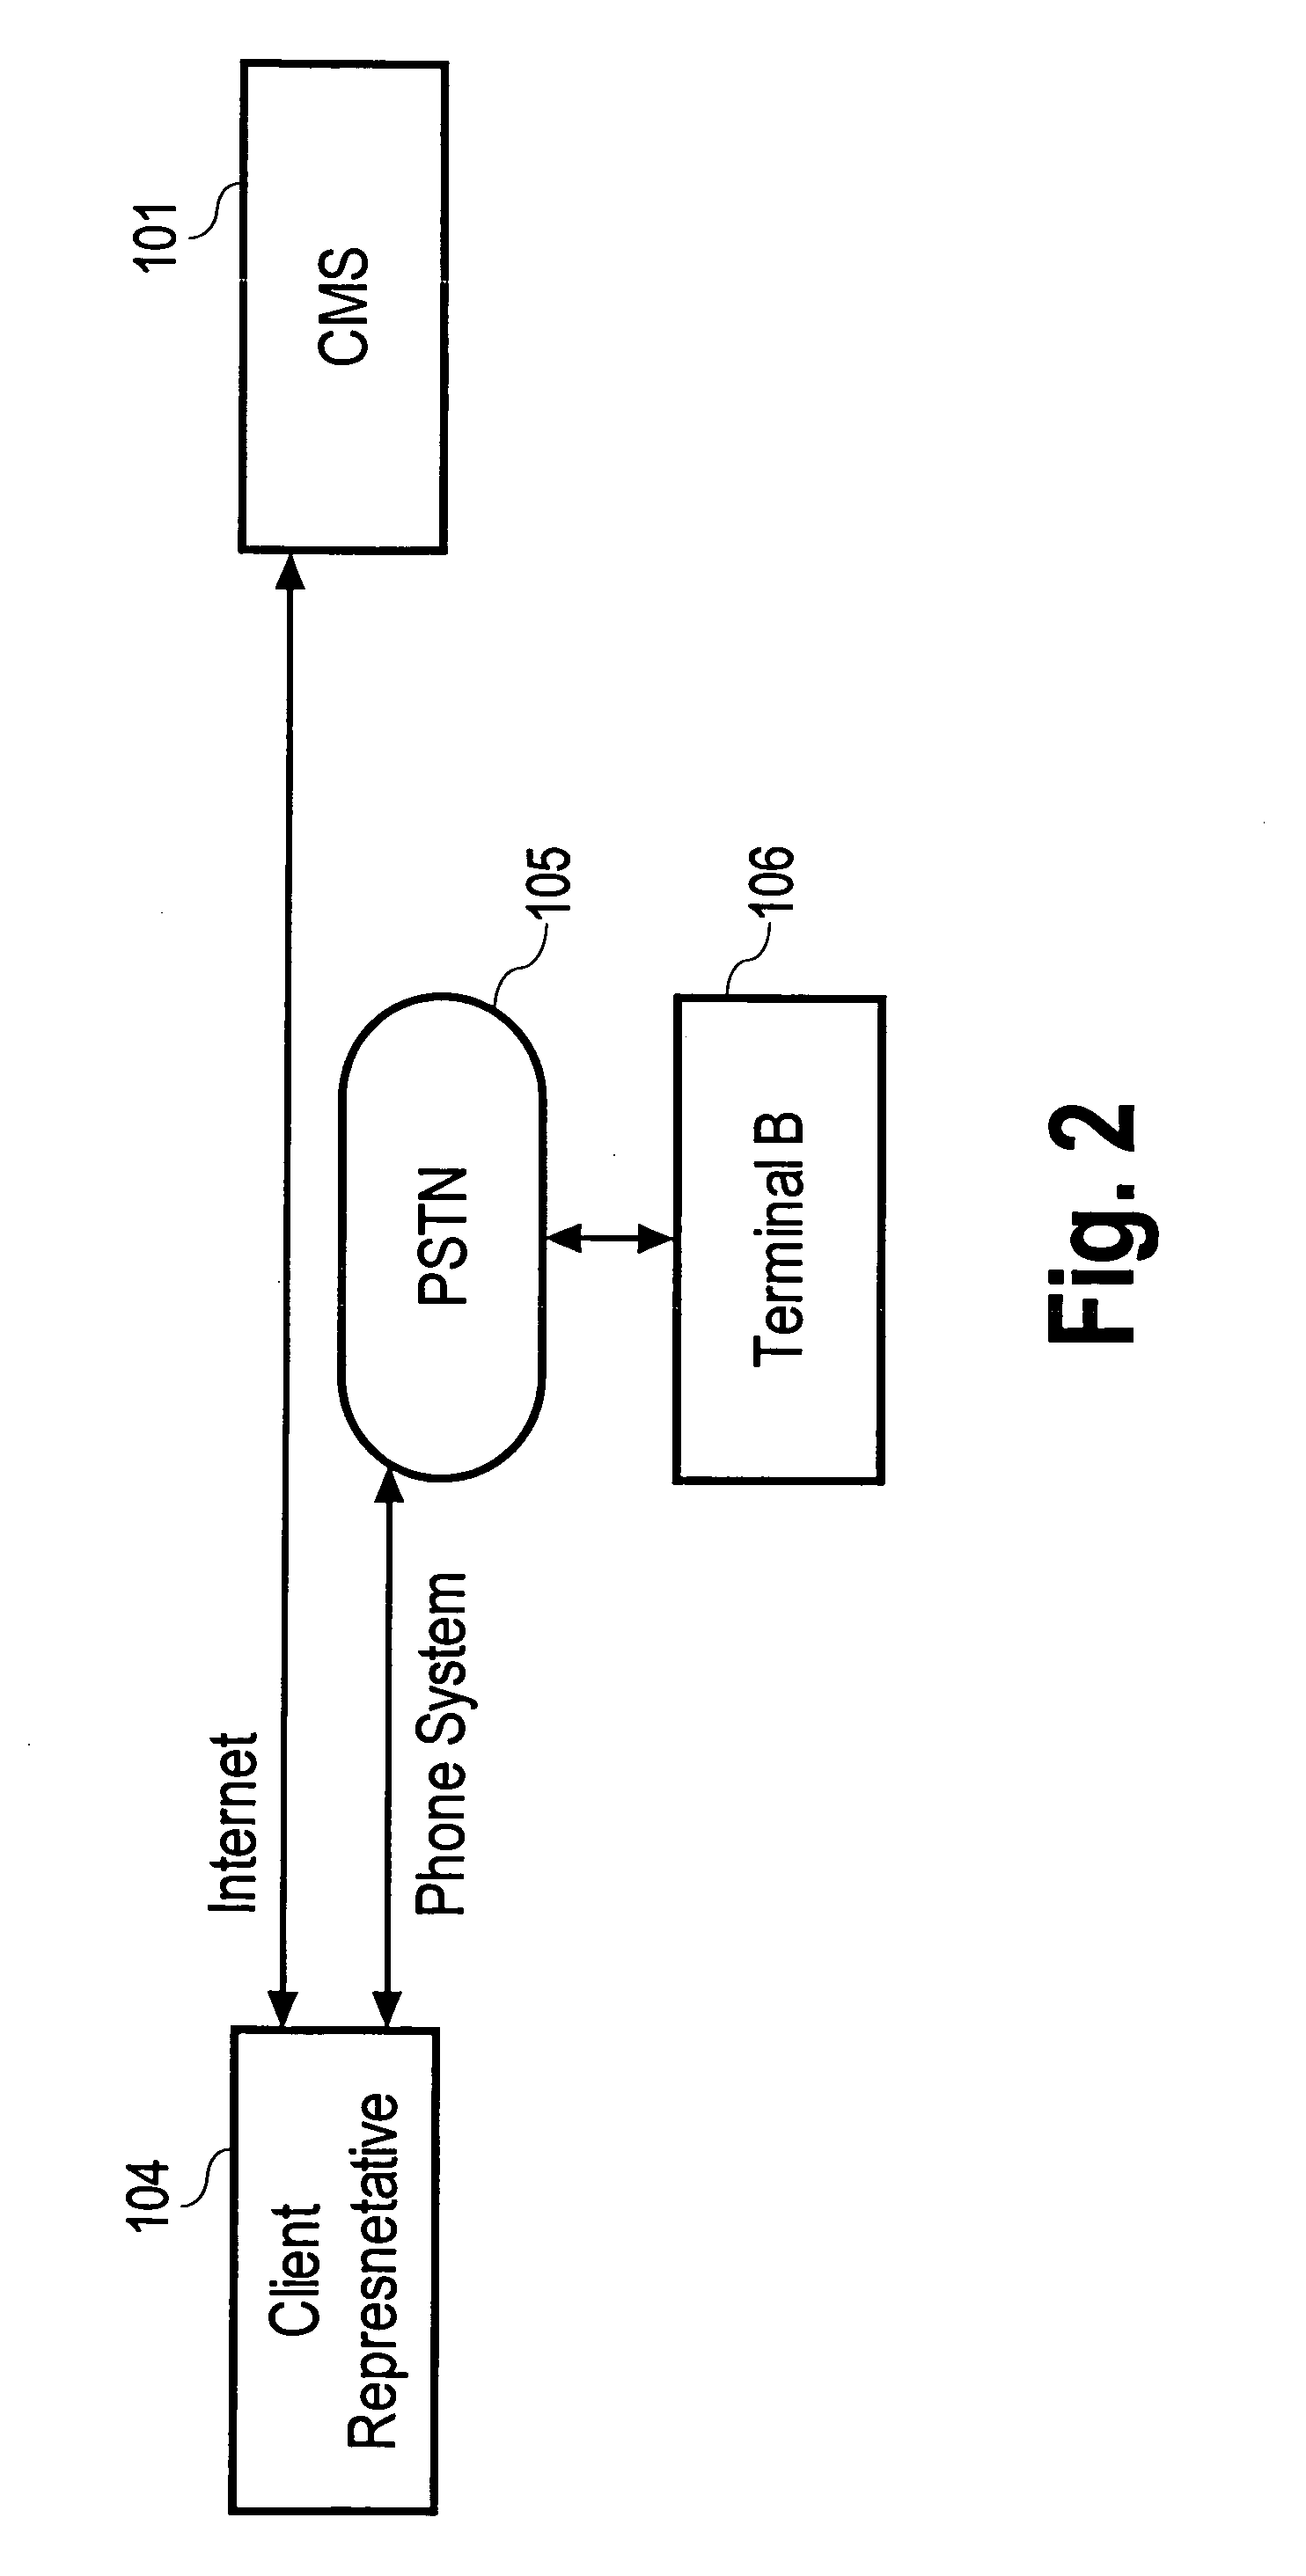 System of providing communication service via client representatives and the method of the same